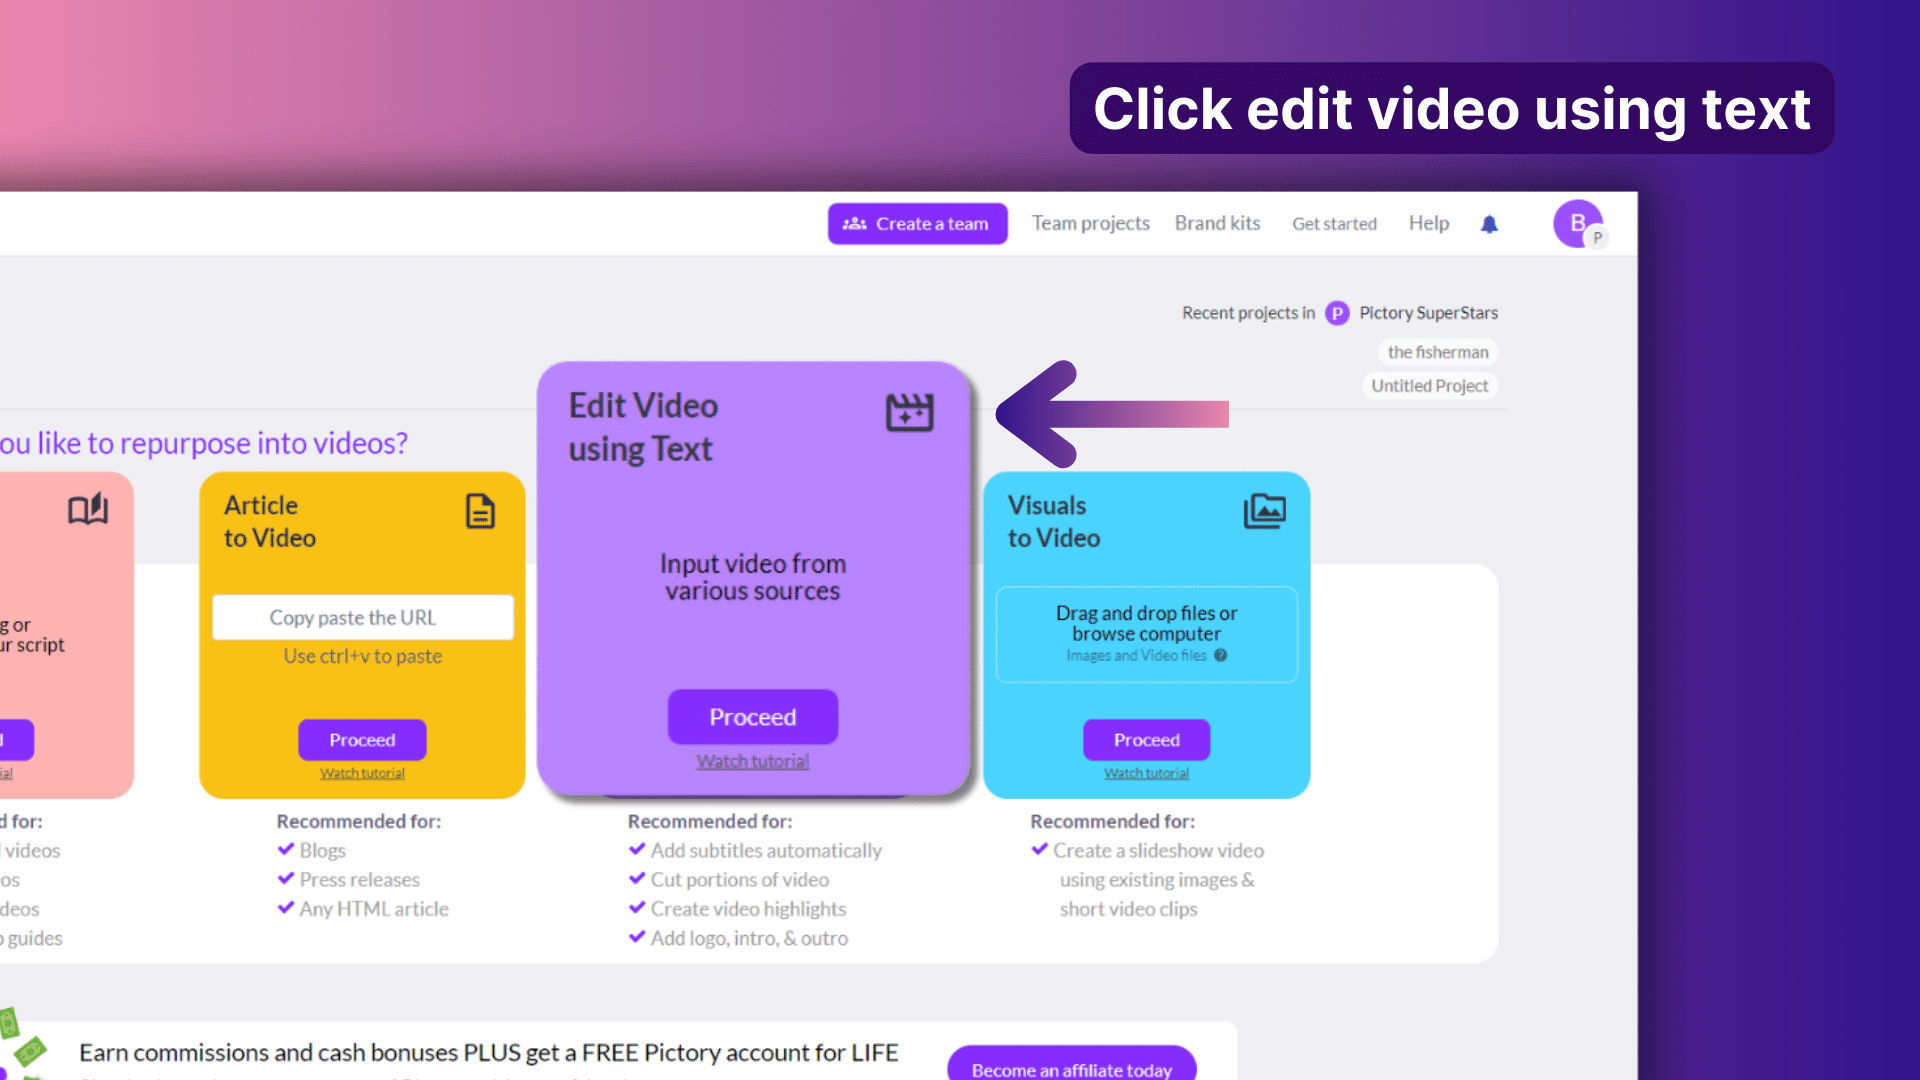 Edit Videos Using Text feature in Pictory